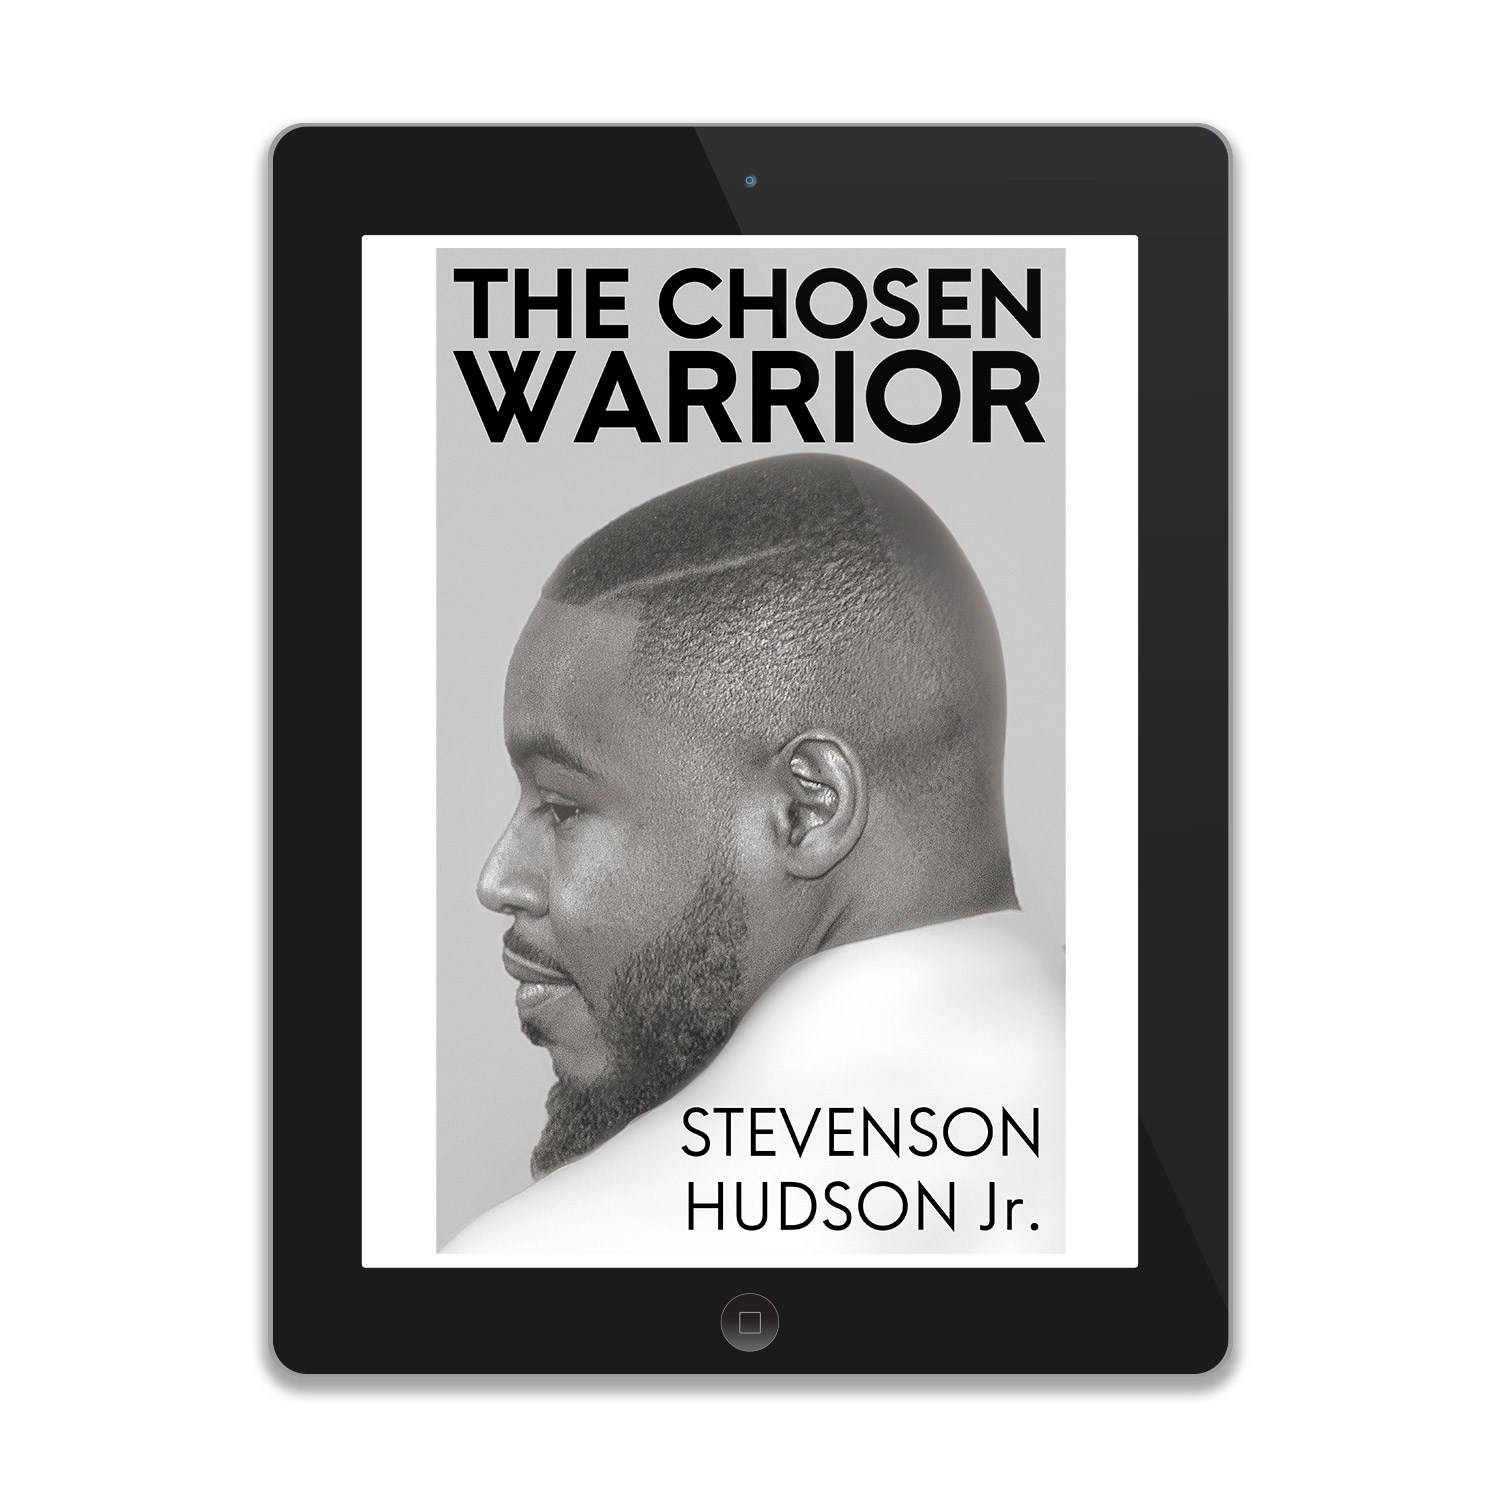 'The Chosen Warrior' is a powerful social memoir, by Stevenson Hudson Jr. The book cover and interior were designed by Mark Thomas, of coverness.com. To find out more about my book design services, please visit www.coverness.com.